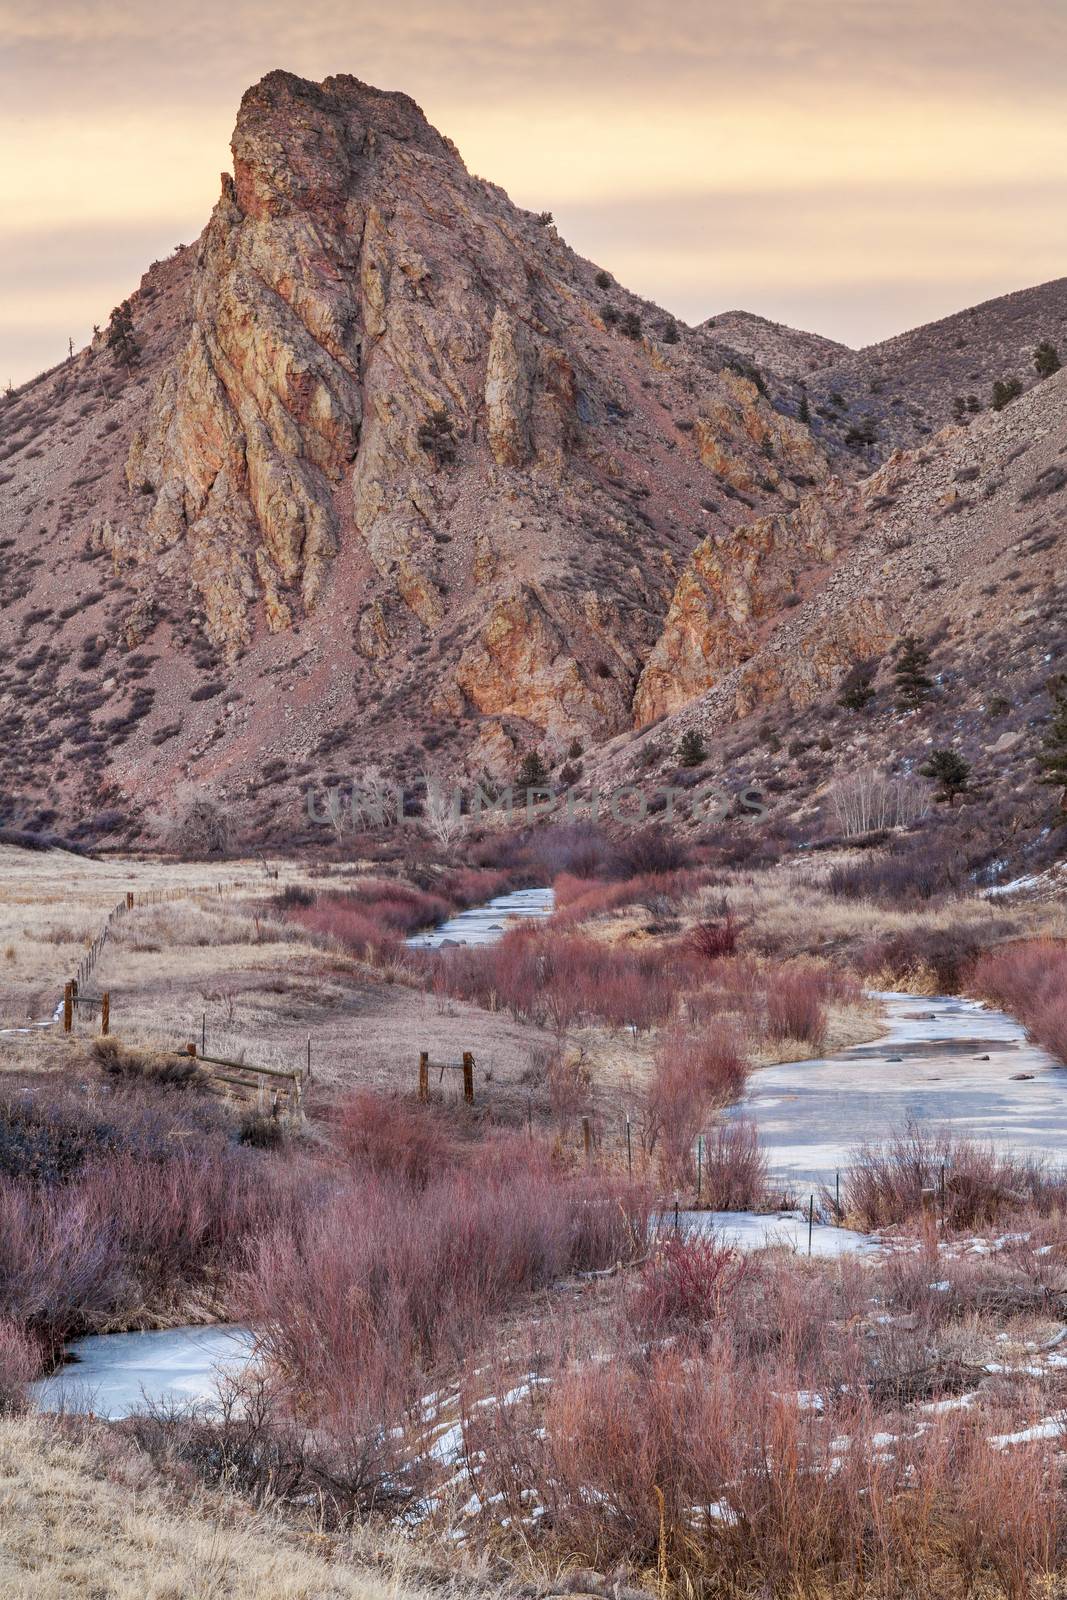 winter dusk in Rocky Mountains - Eagle Nest Rock and North Fork of Cache la Poudre River in northern Colorado near Fort Collins